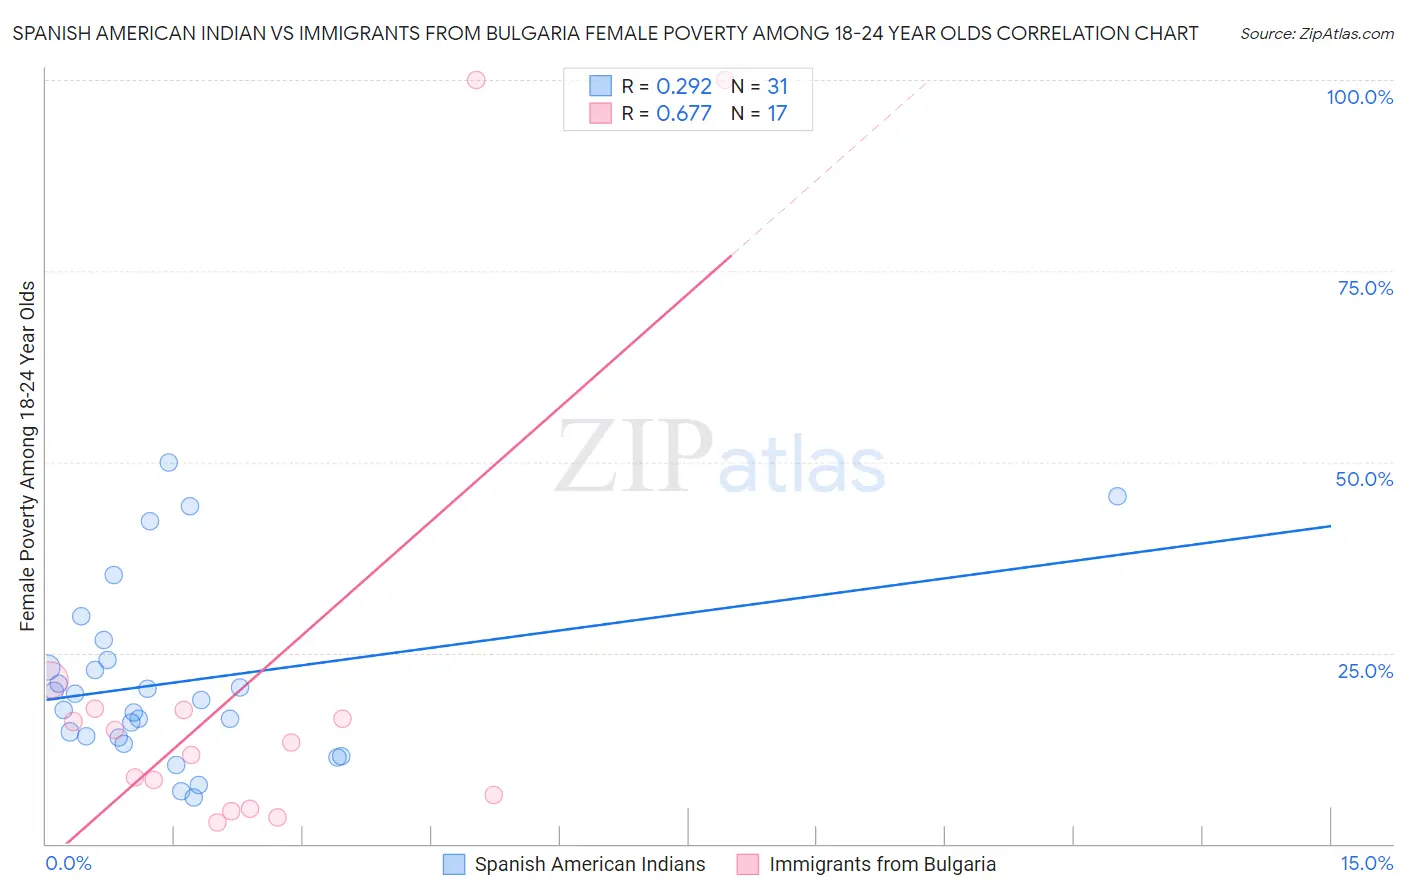 Spanish American Indian vs Immigrants from Bulgaria Female Poverty Among 18-24 Year Olds